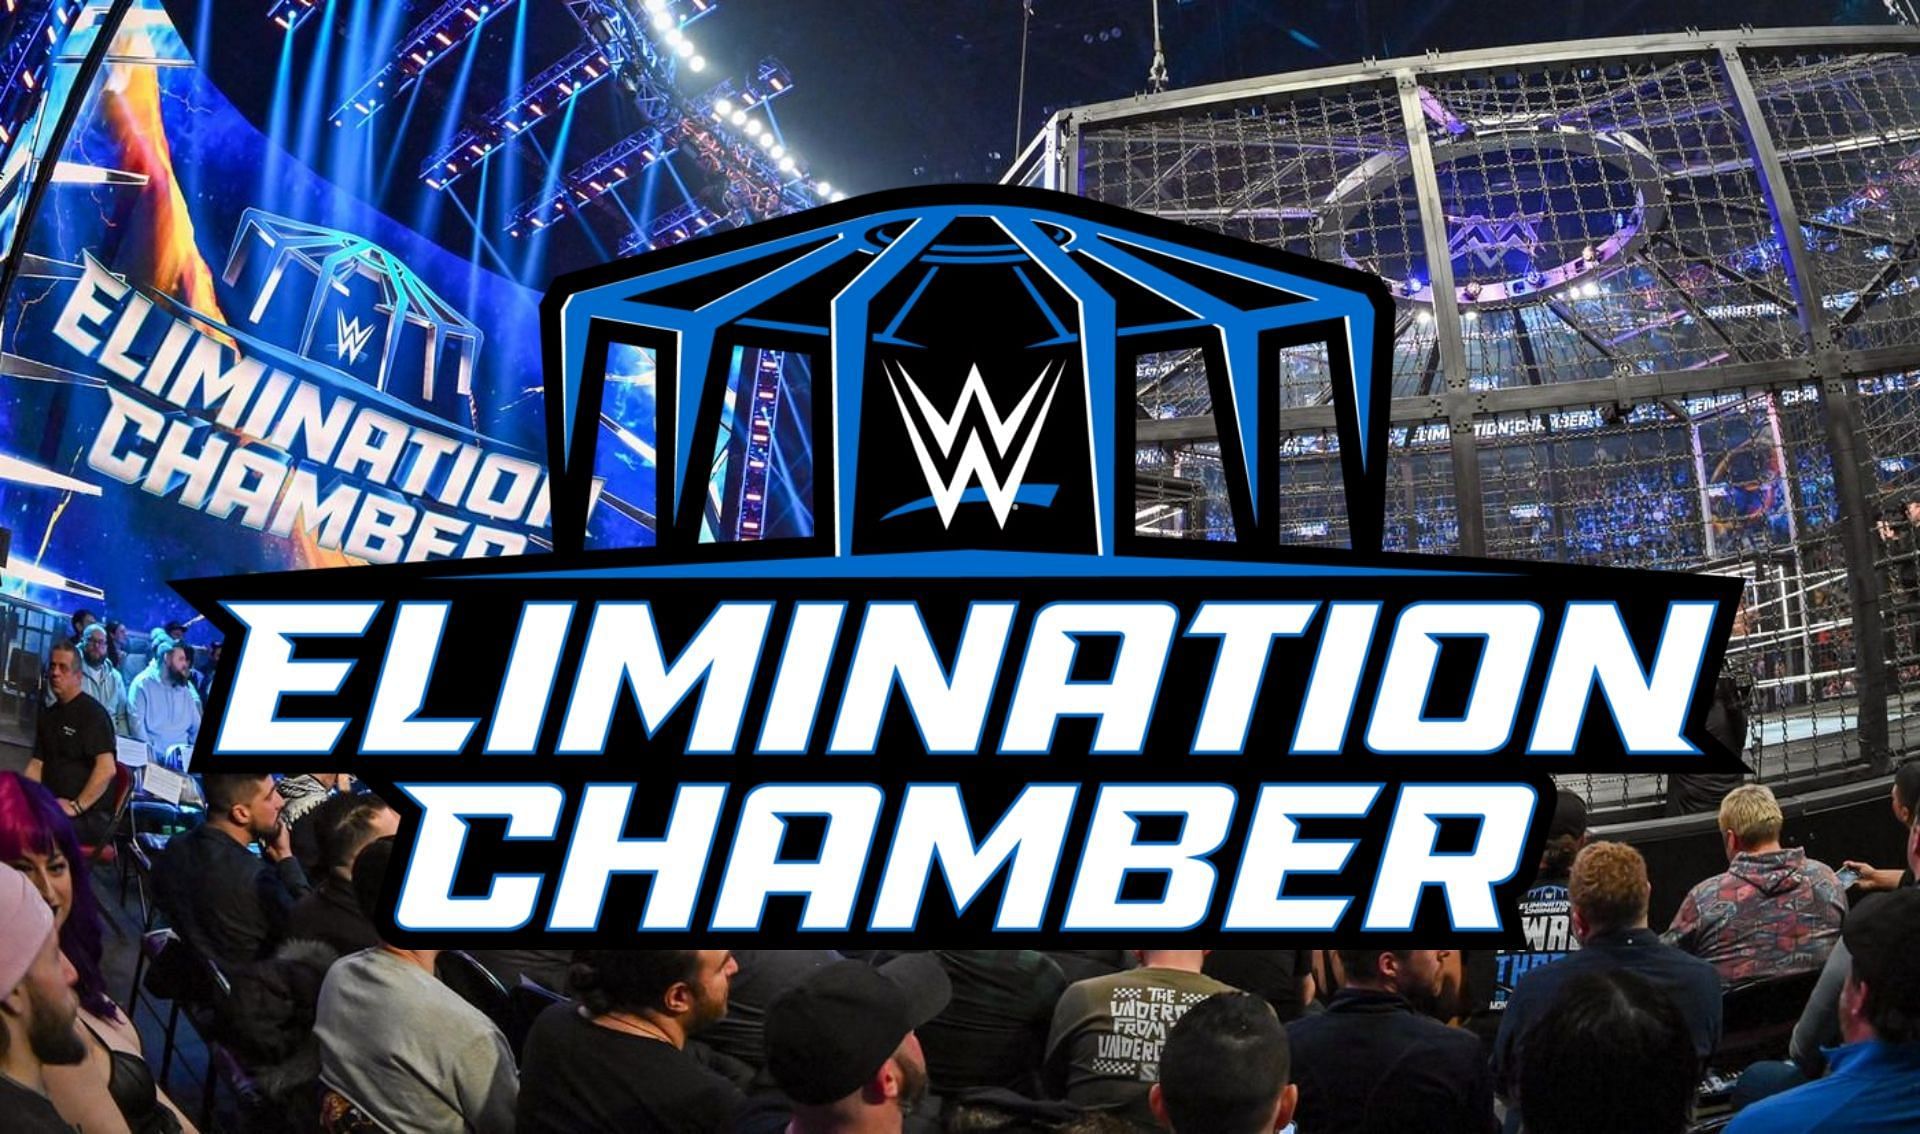 Elimination Chamber took place this past Saturday in Montreal.